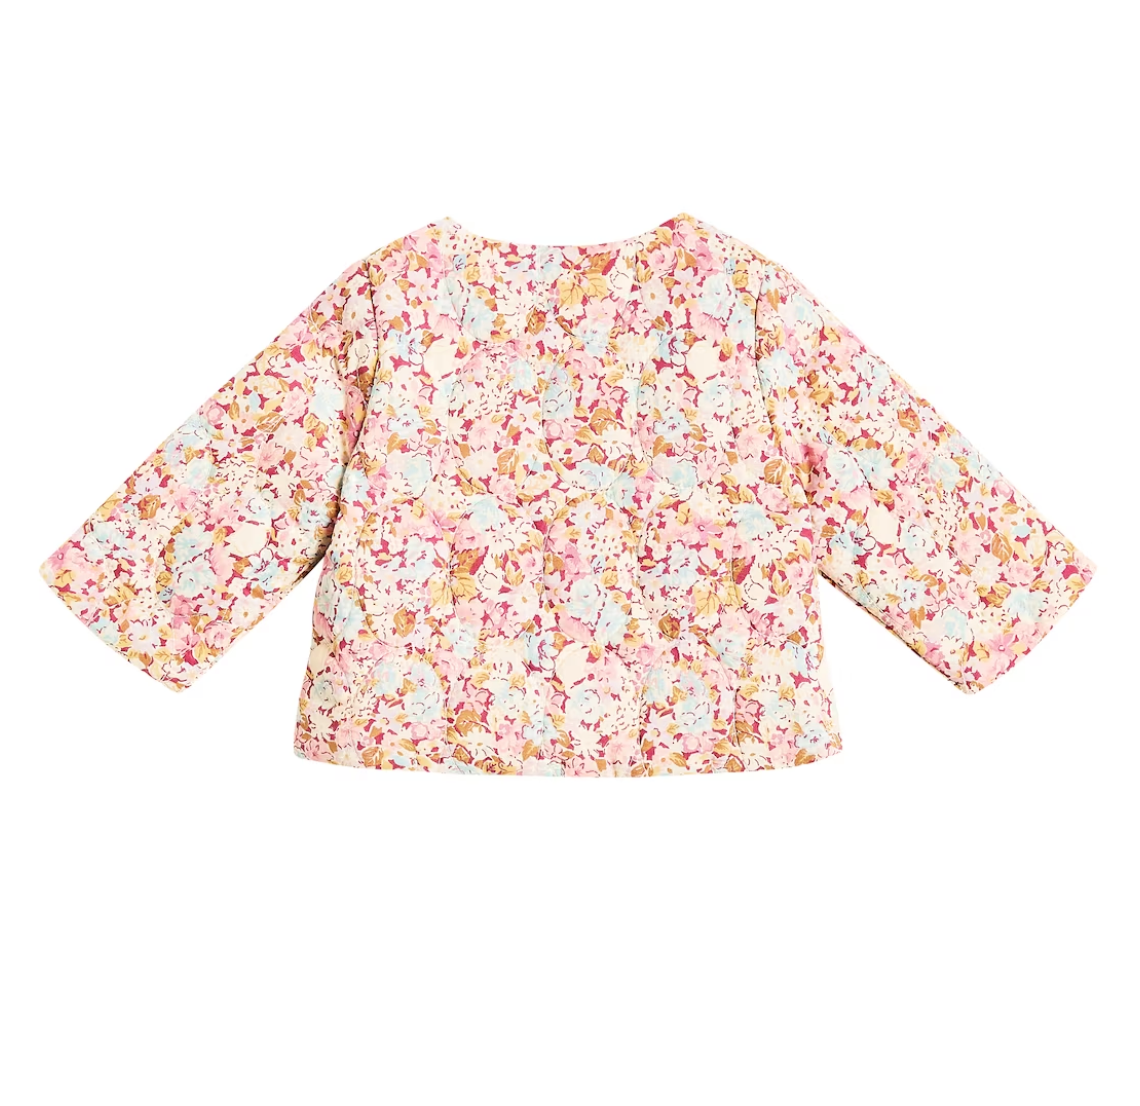 A quilted patchwork jacket filled with colorful flowers. Made with 100% organic cotton, including the lining. Louise misha orisha patchwork jacket.